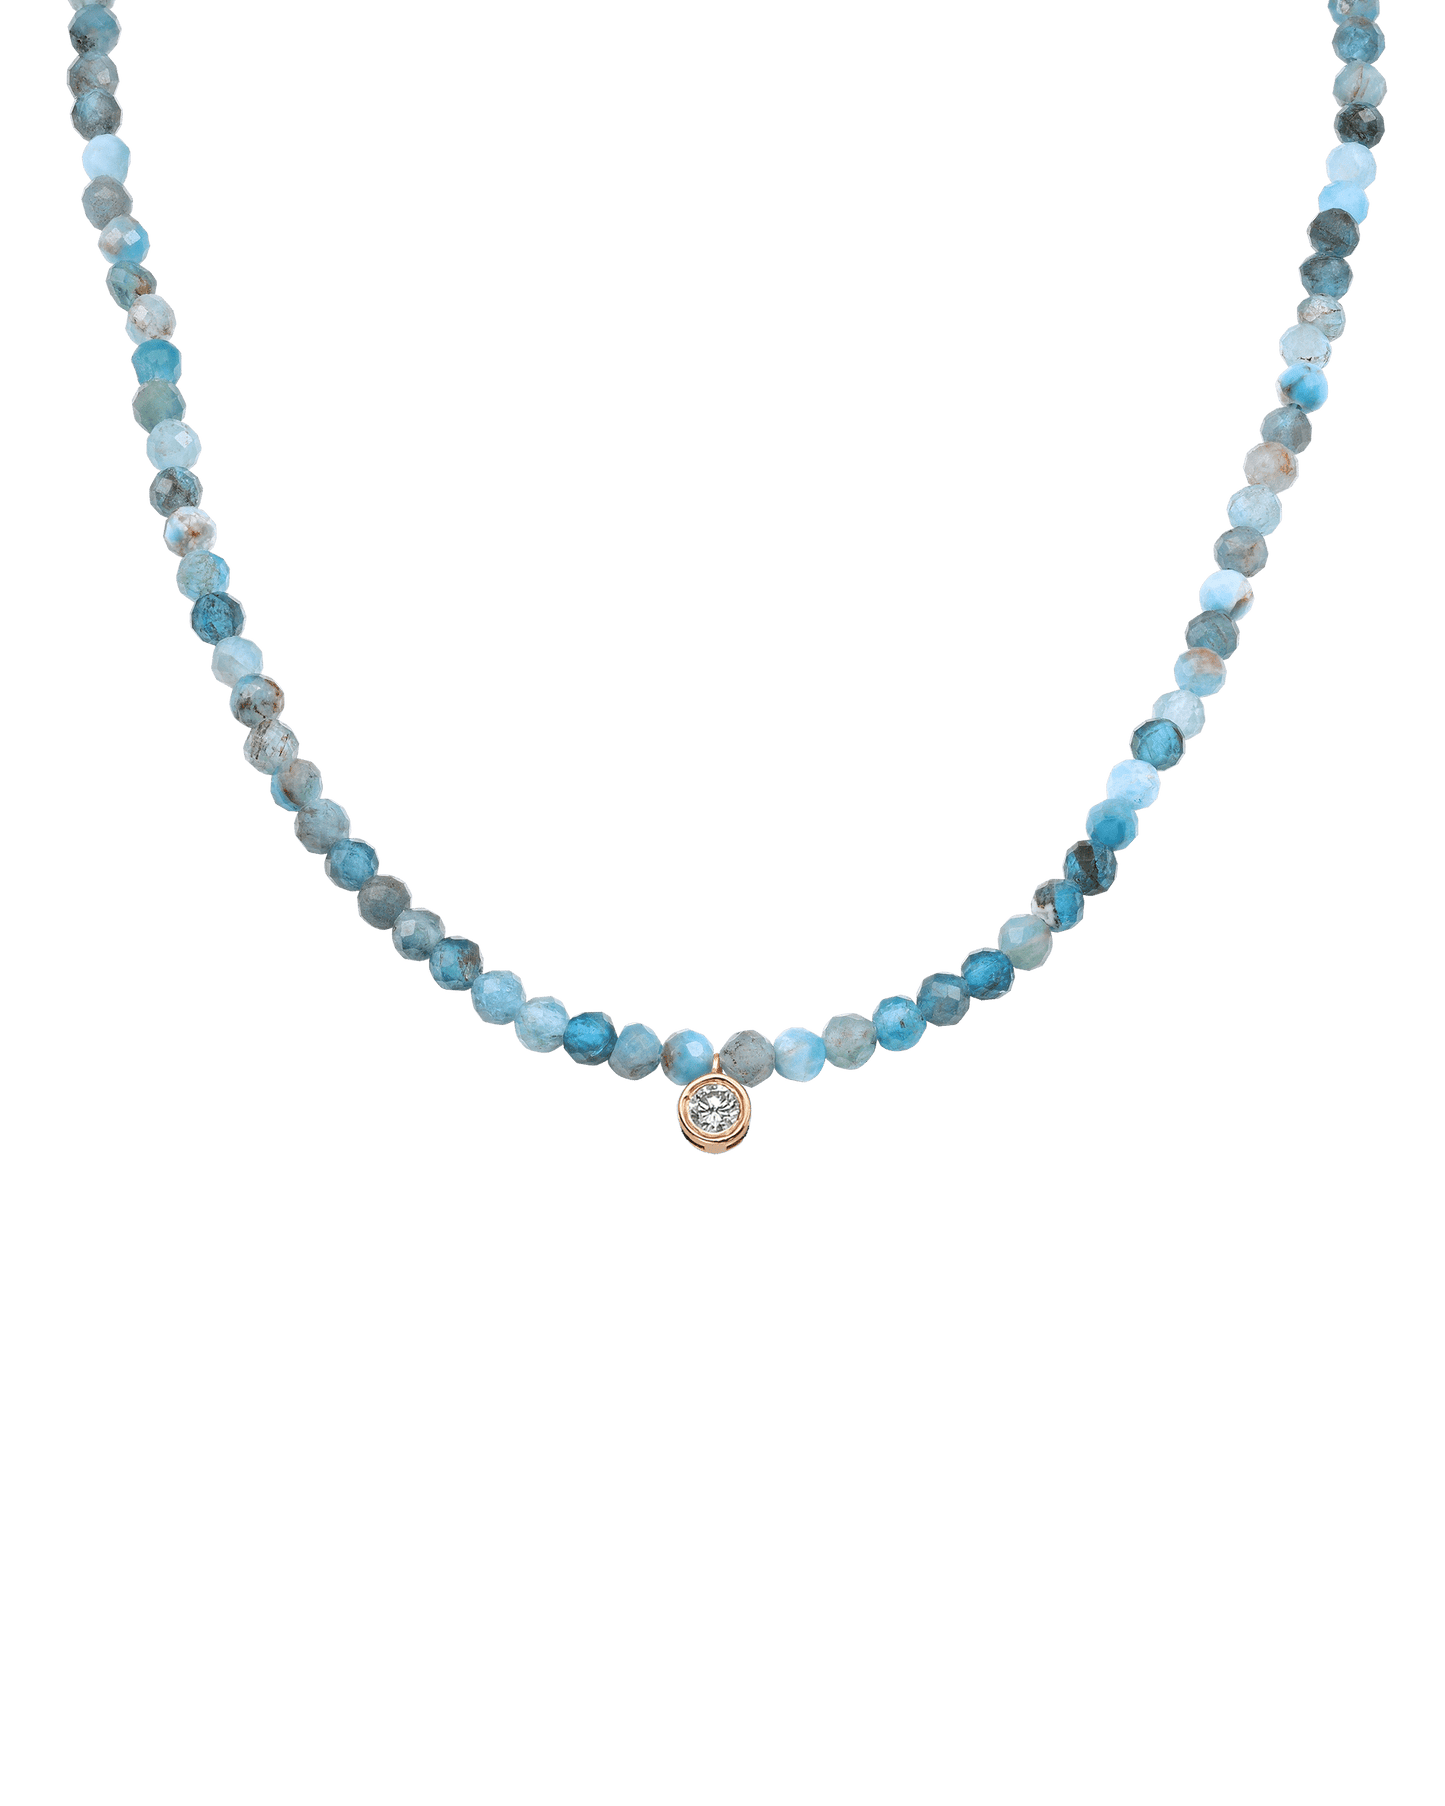 The Gemstone & Diamond Necklace - 14K Rose Gold Necklaces 14K Solid Gold Natural Turquoise Large: 0.1ct 14"